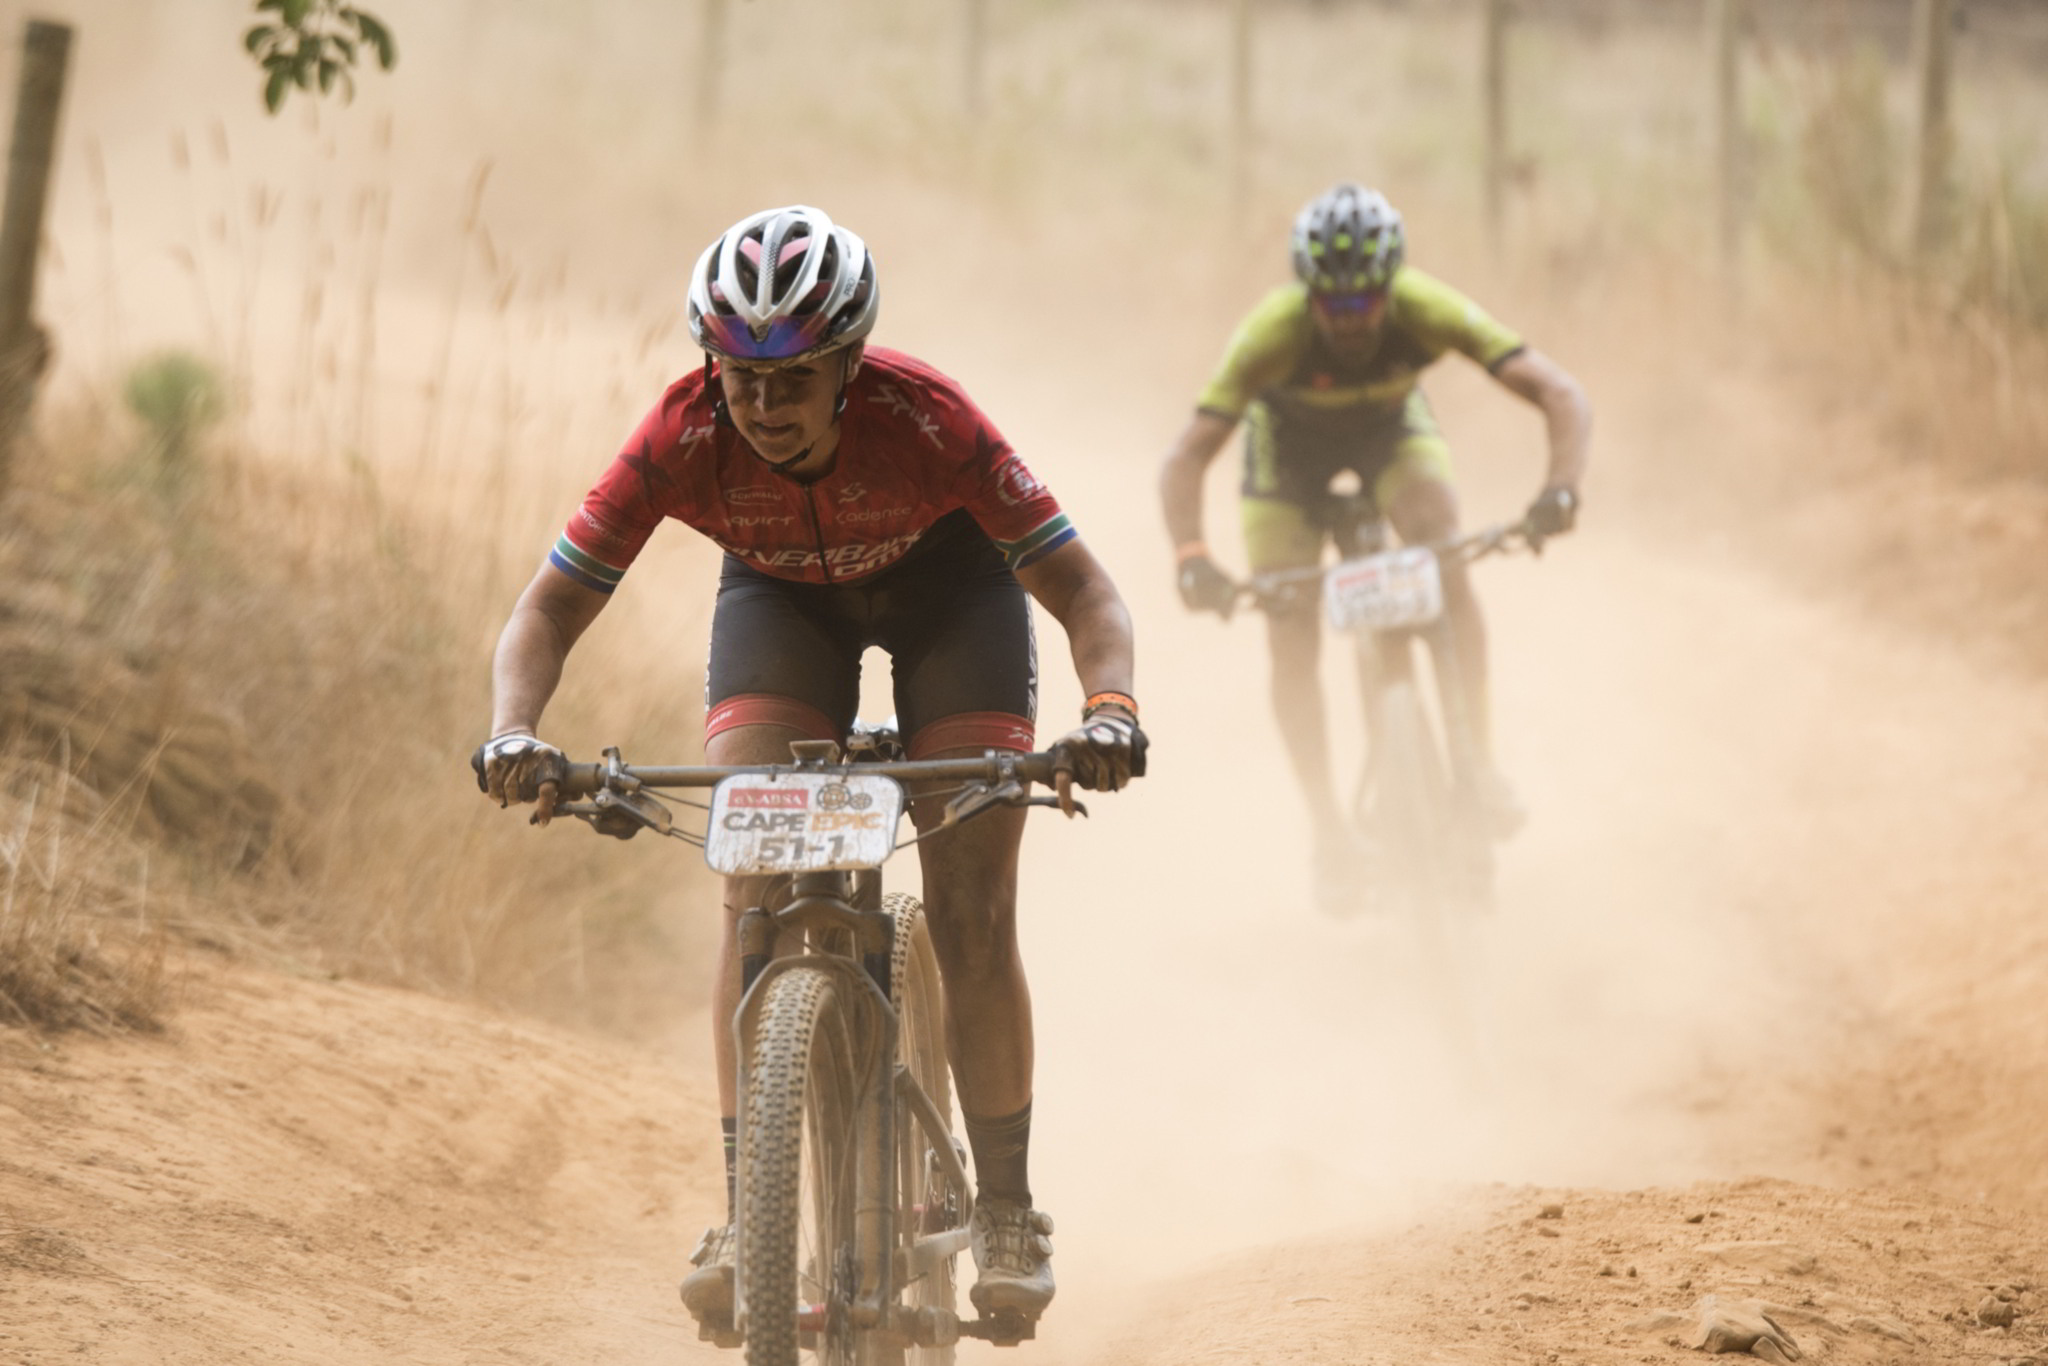 <br />Photo by Andrew McFadden/Cape Epic/SPORTZPICS